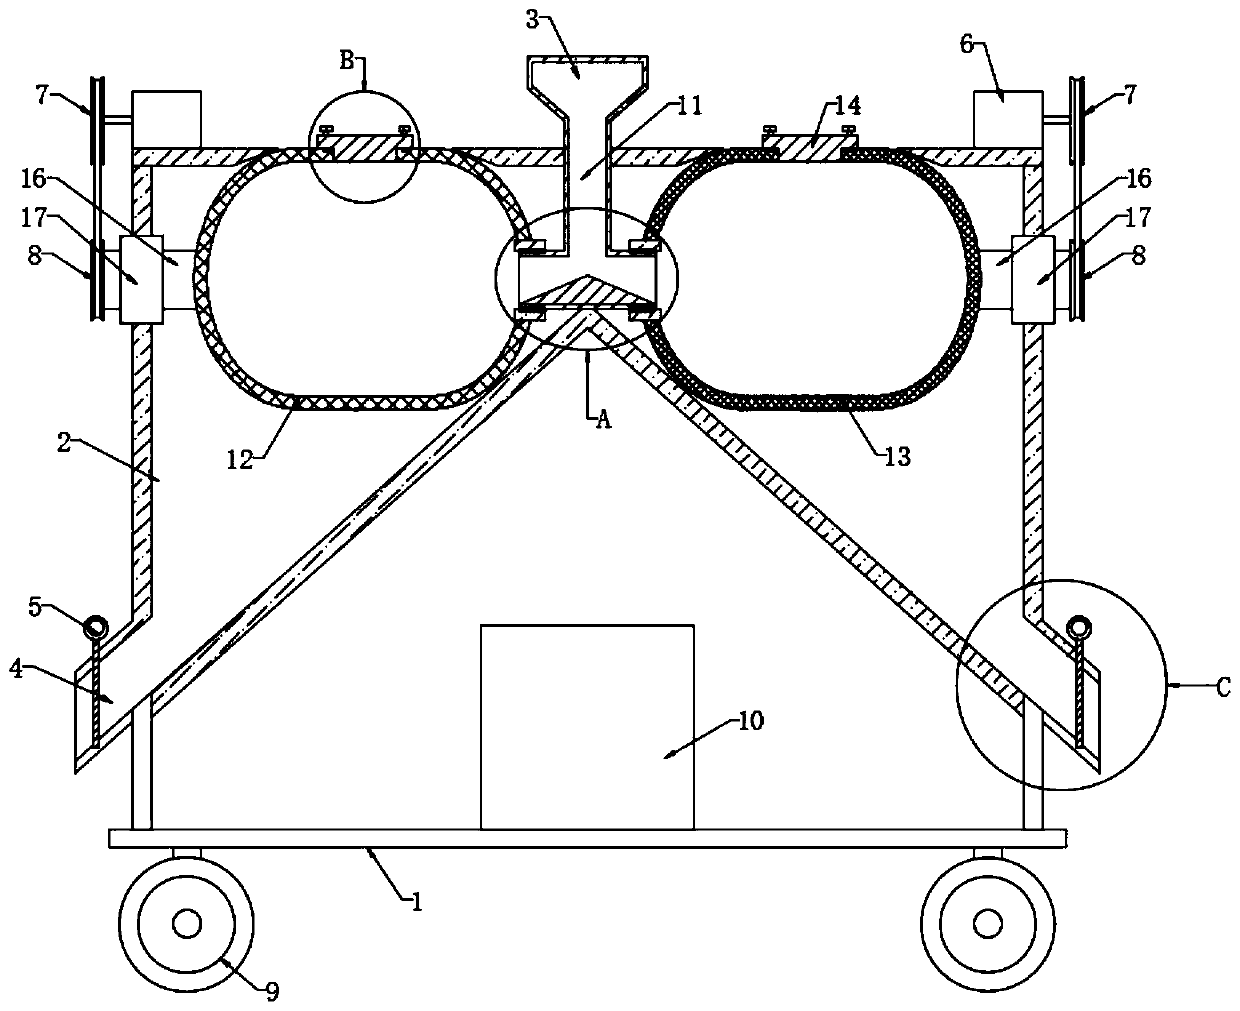 Sand sieving device for civil engineering